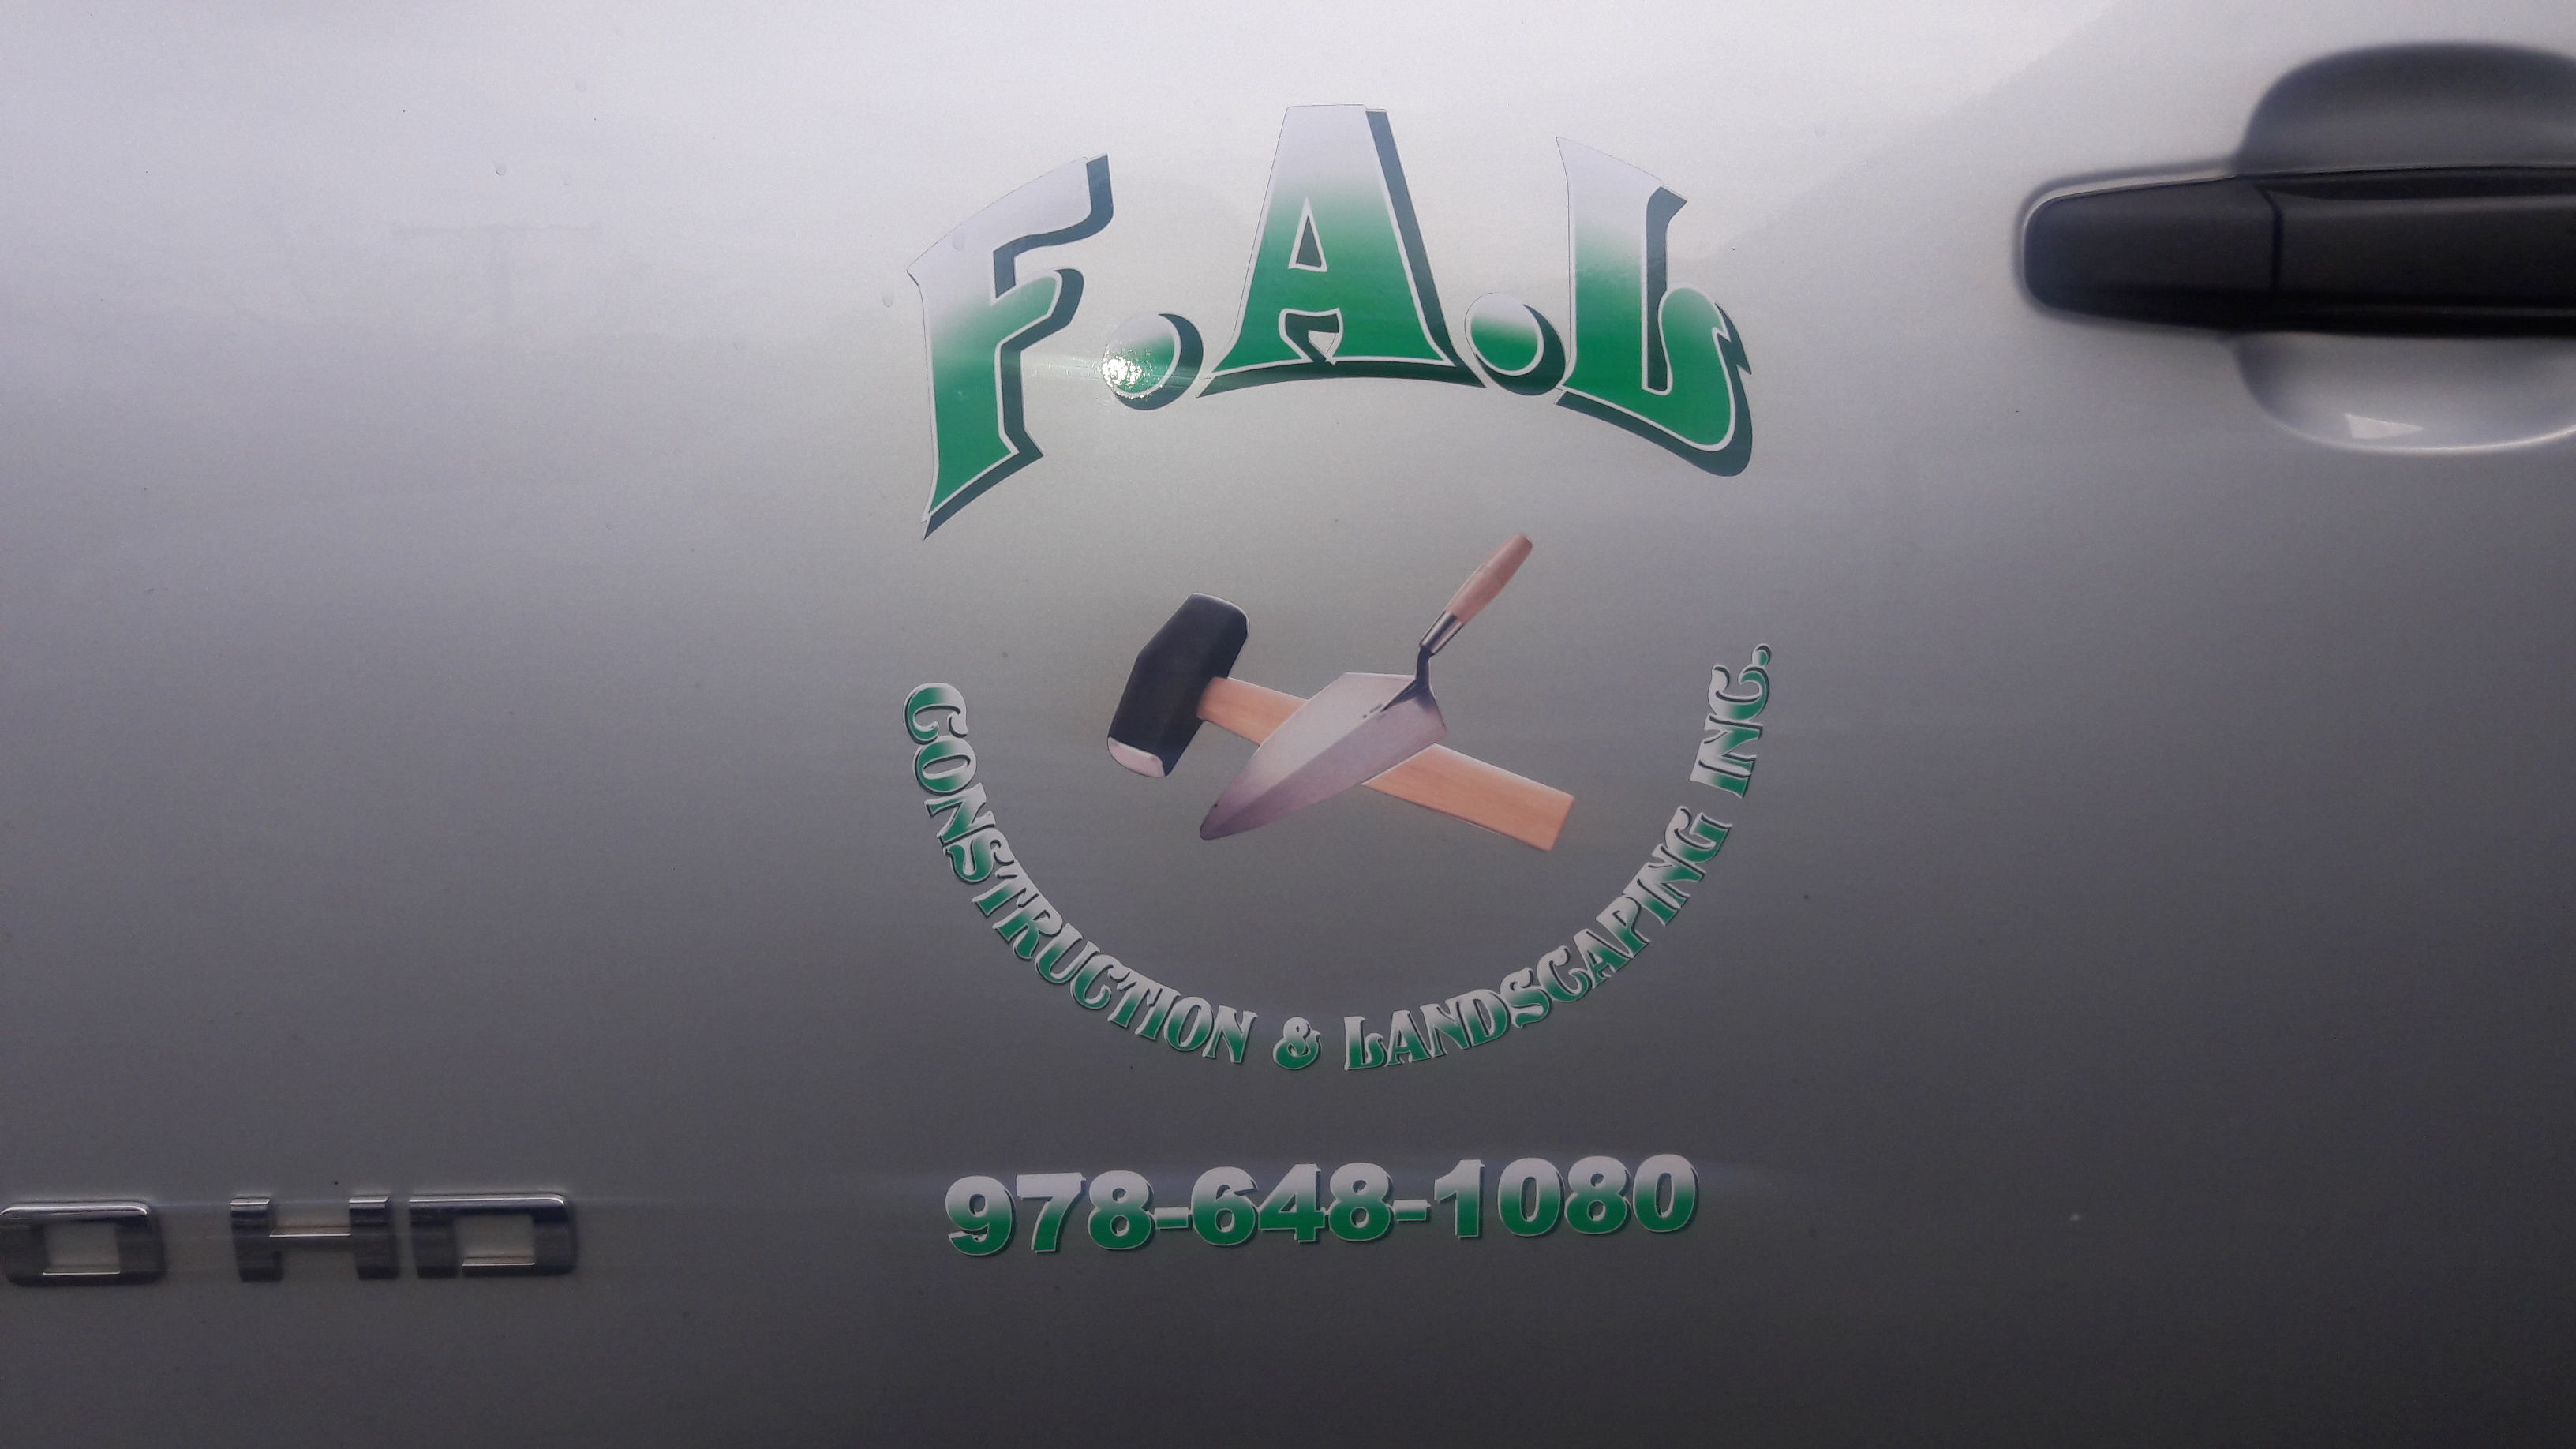 F.A.L Tree service's and Hardscape - Home  Facebook Logo